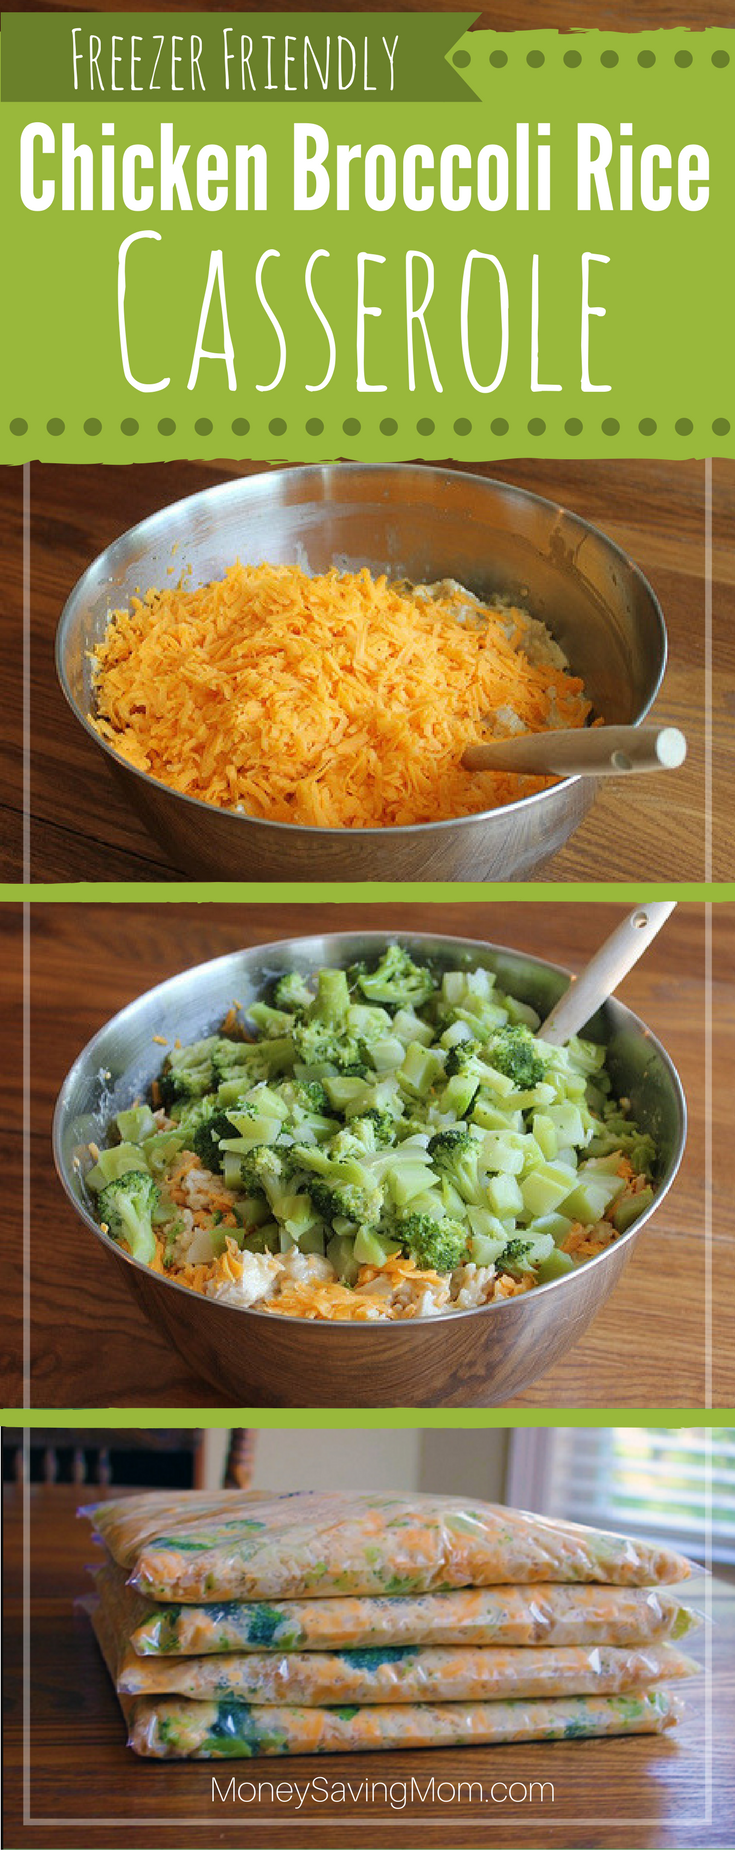 Freezer Friendly Chicken Broccoli Rice Casserole -- frugal, easy to whip up, delicious, filling, and it even freezes well!